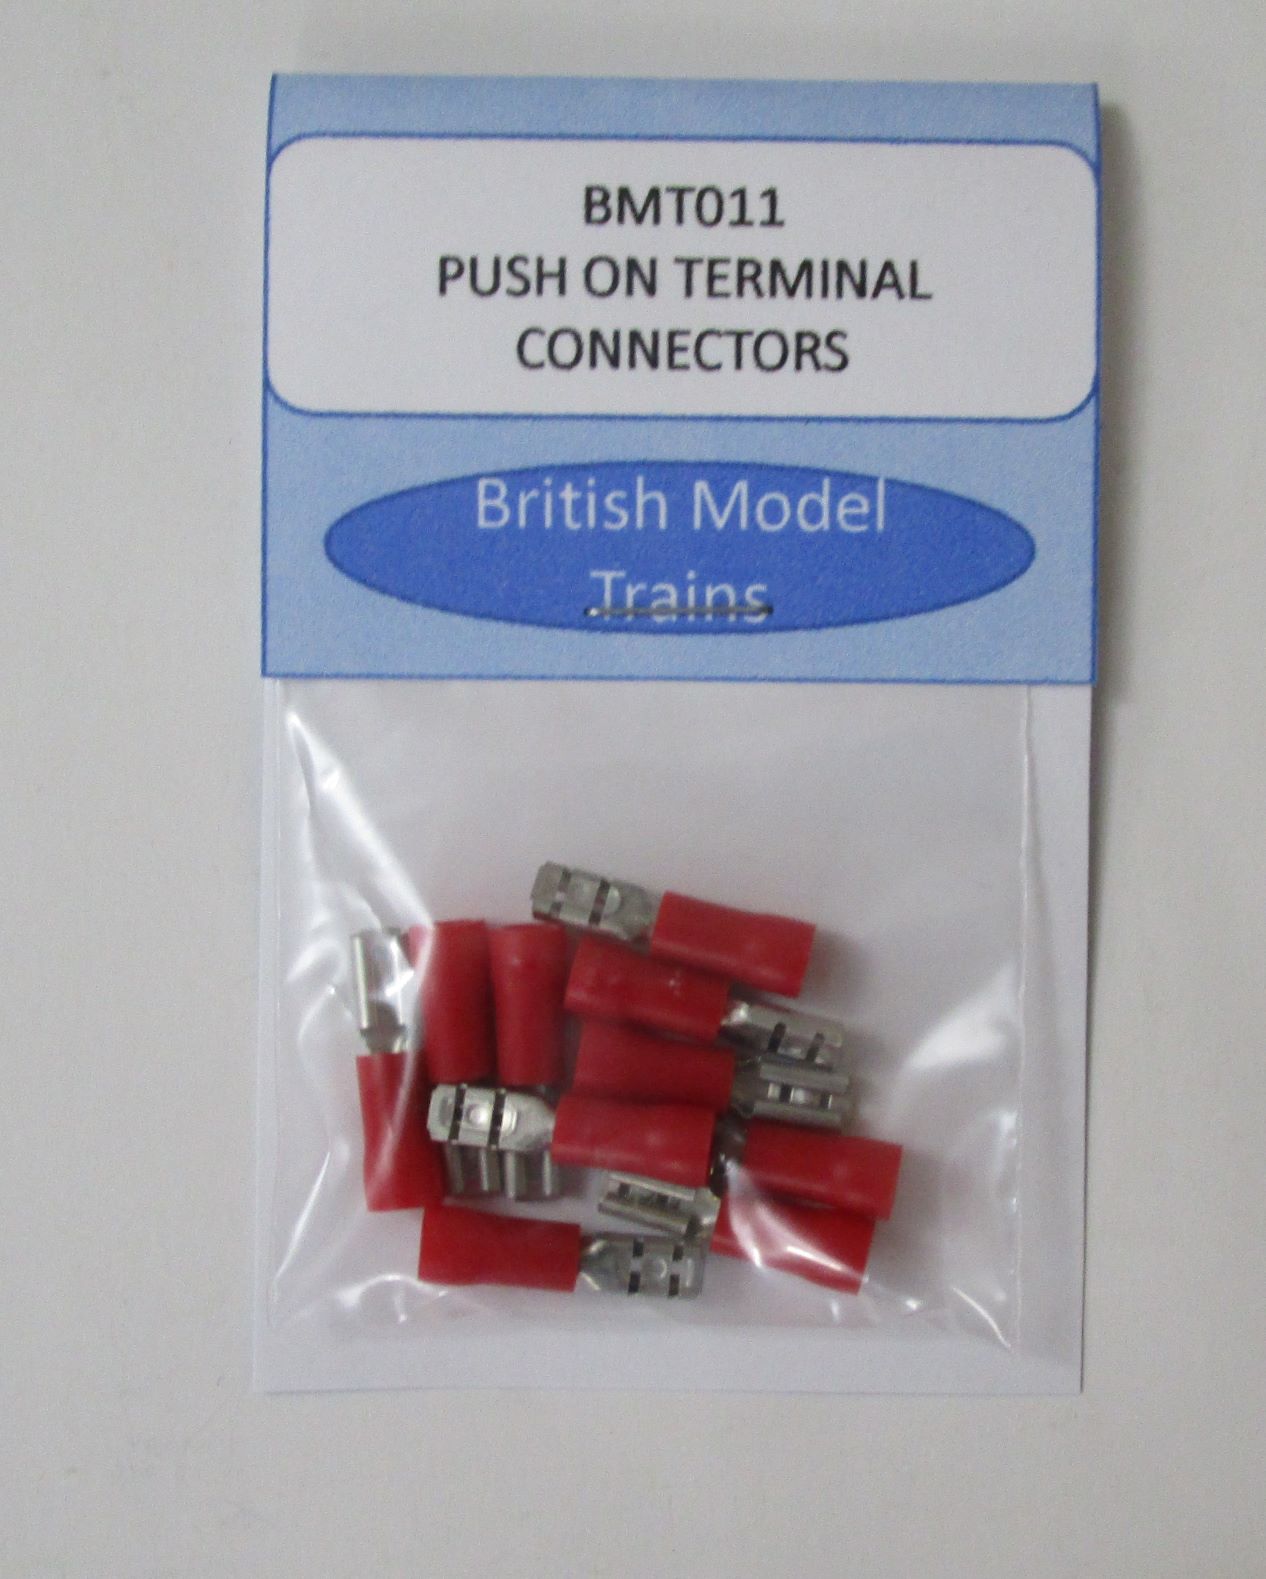 BMT011 Push on terminal connectors - pack of 10